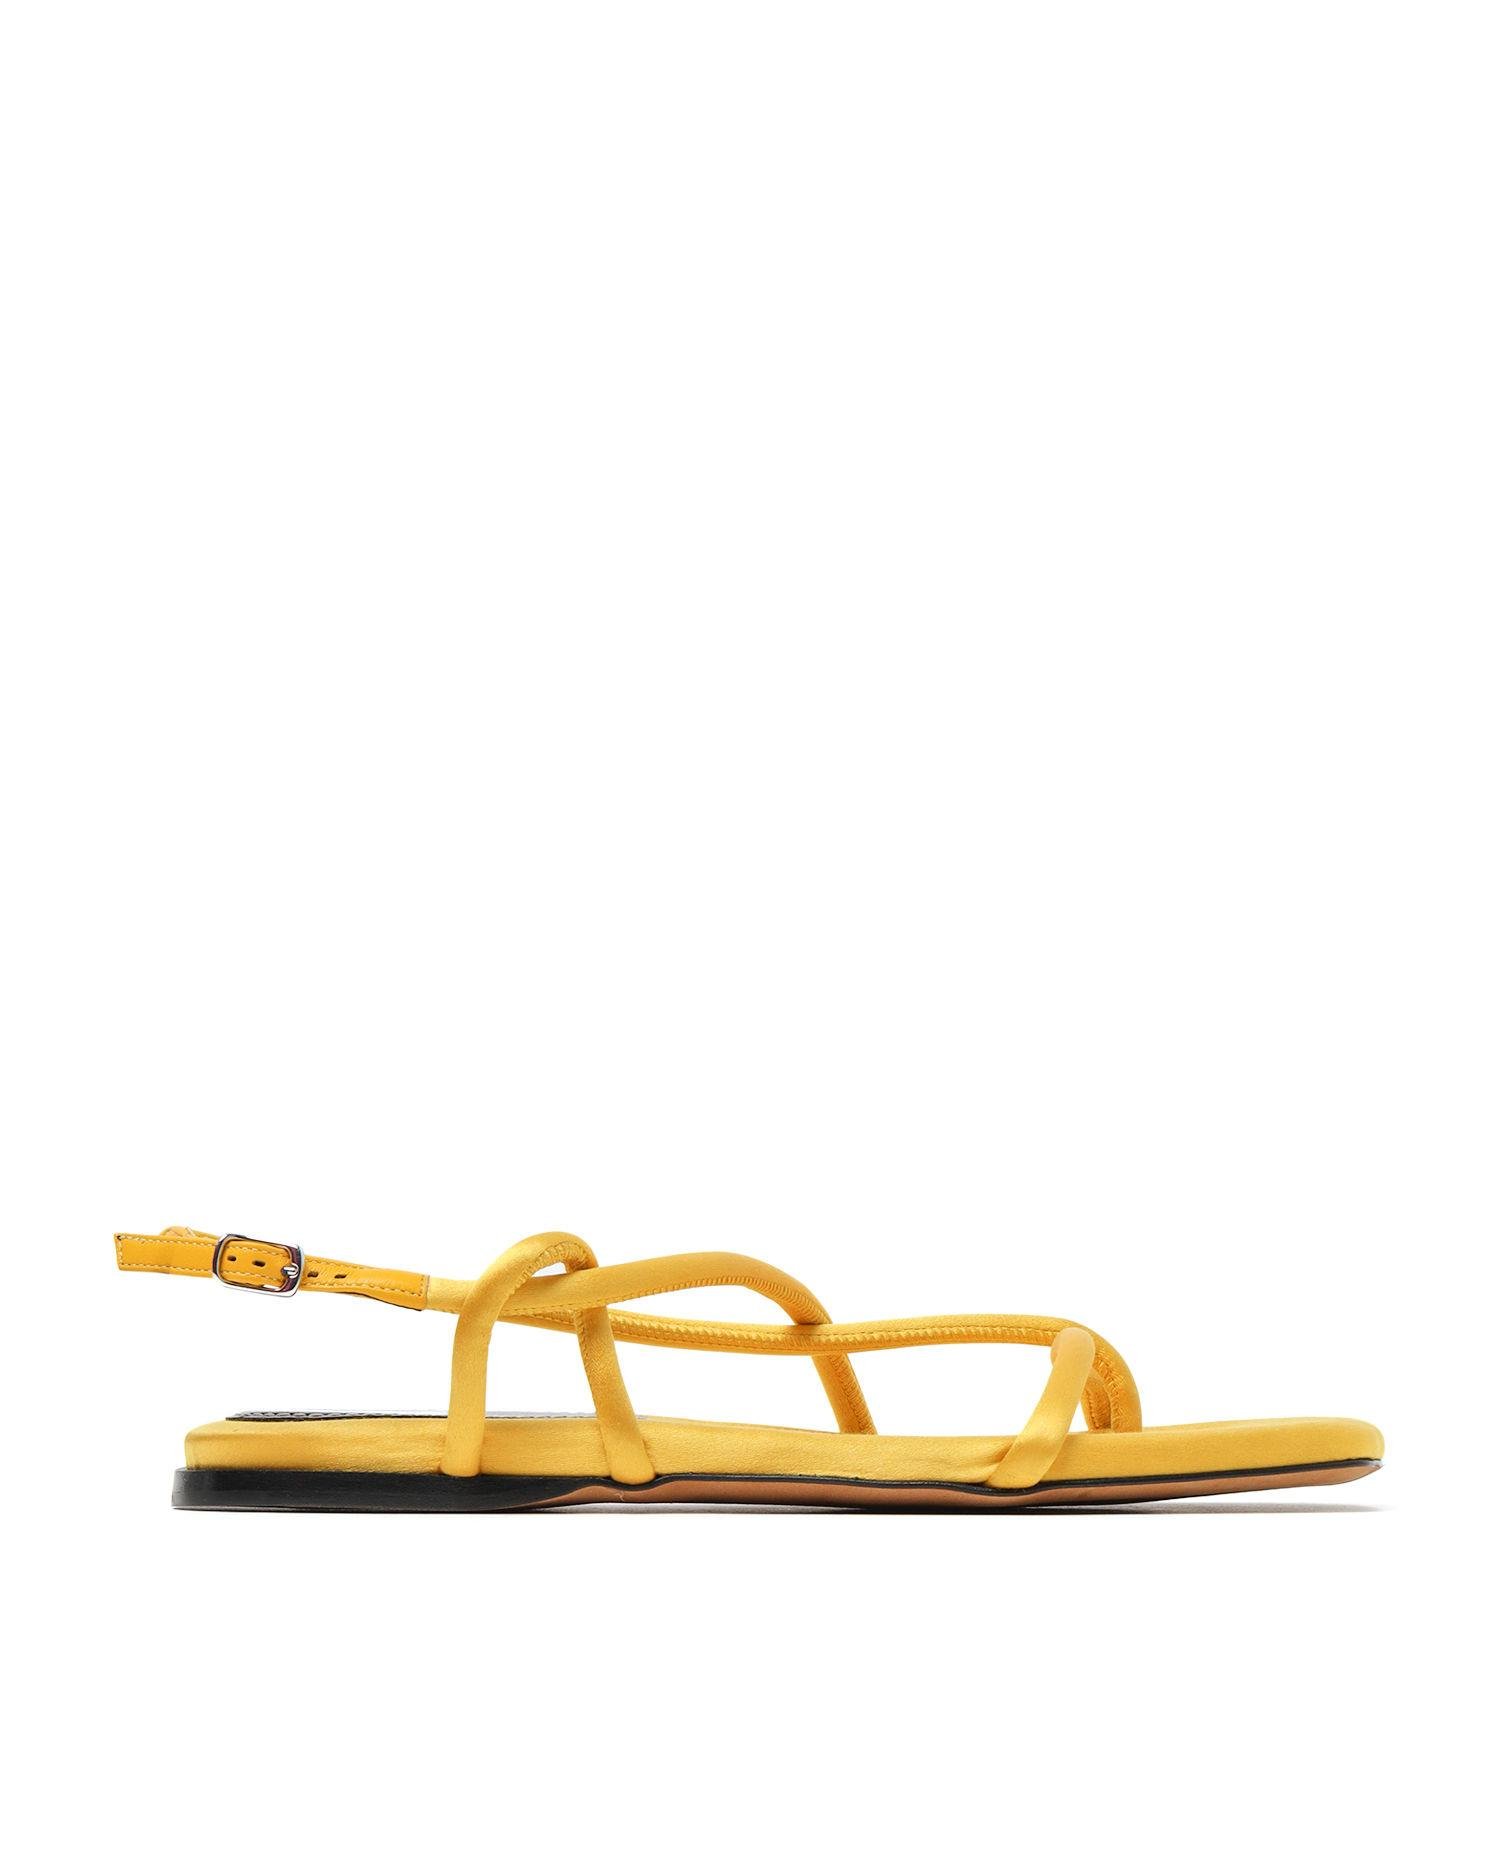 Square strappy sandals by PROENZA SCHOULER